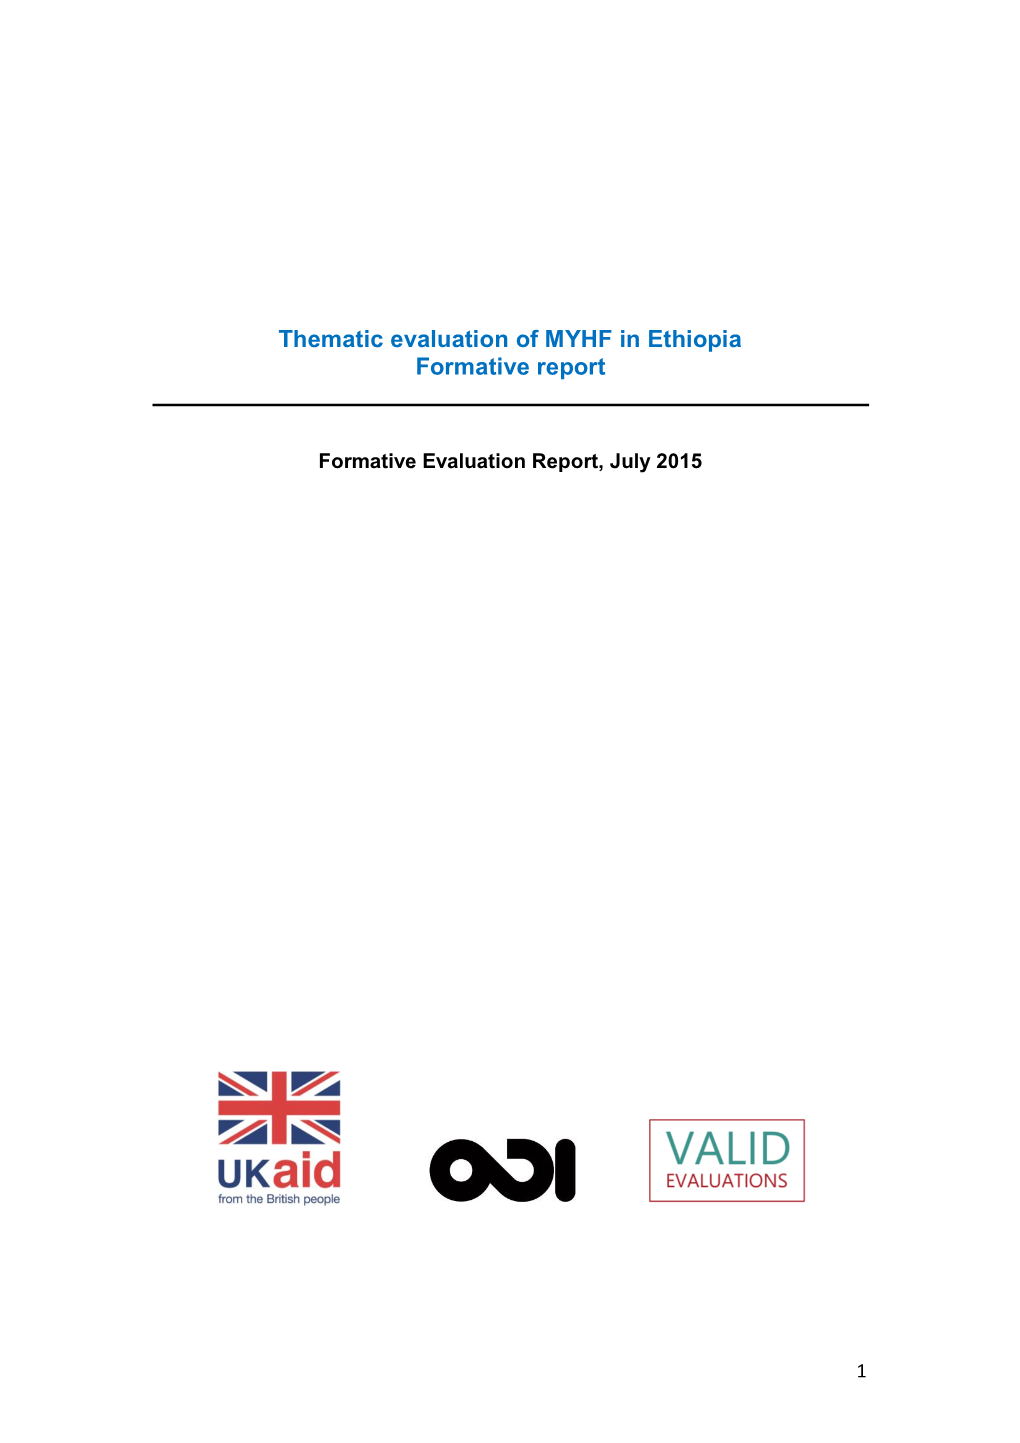 Thematic Evaluation of MYHF in Ethiopia Formative Report